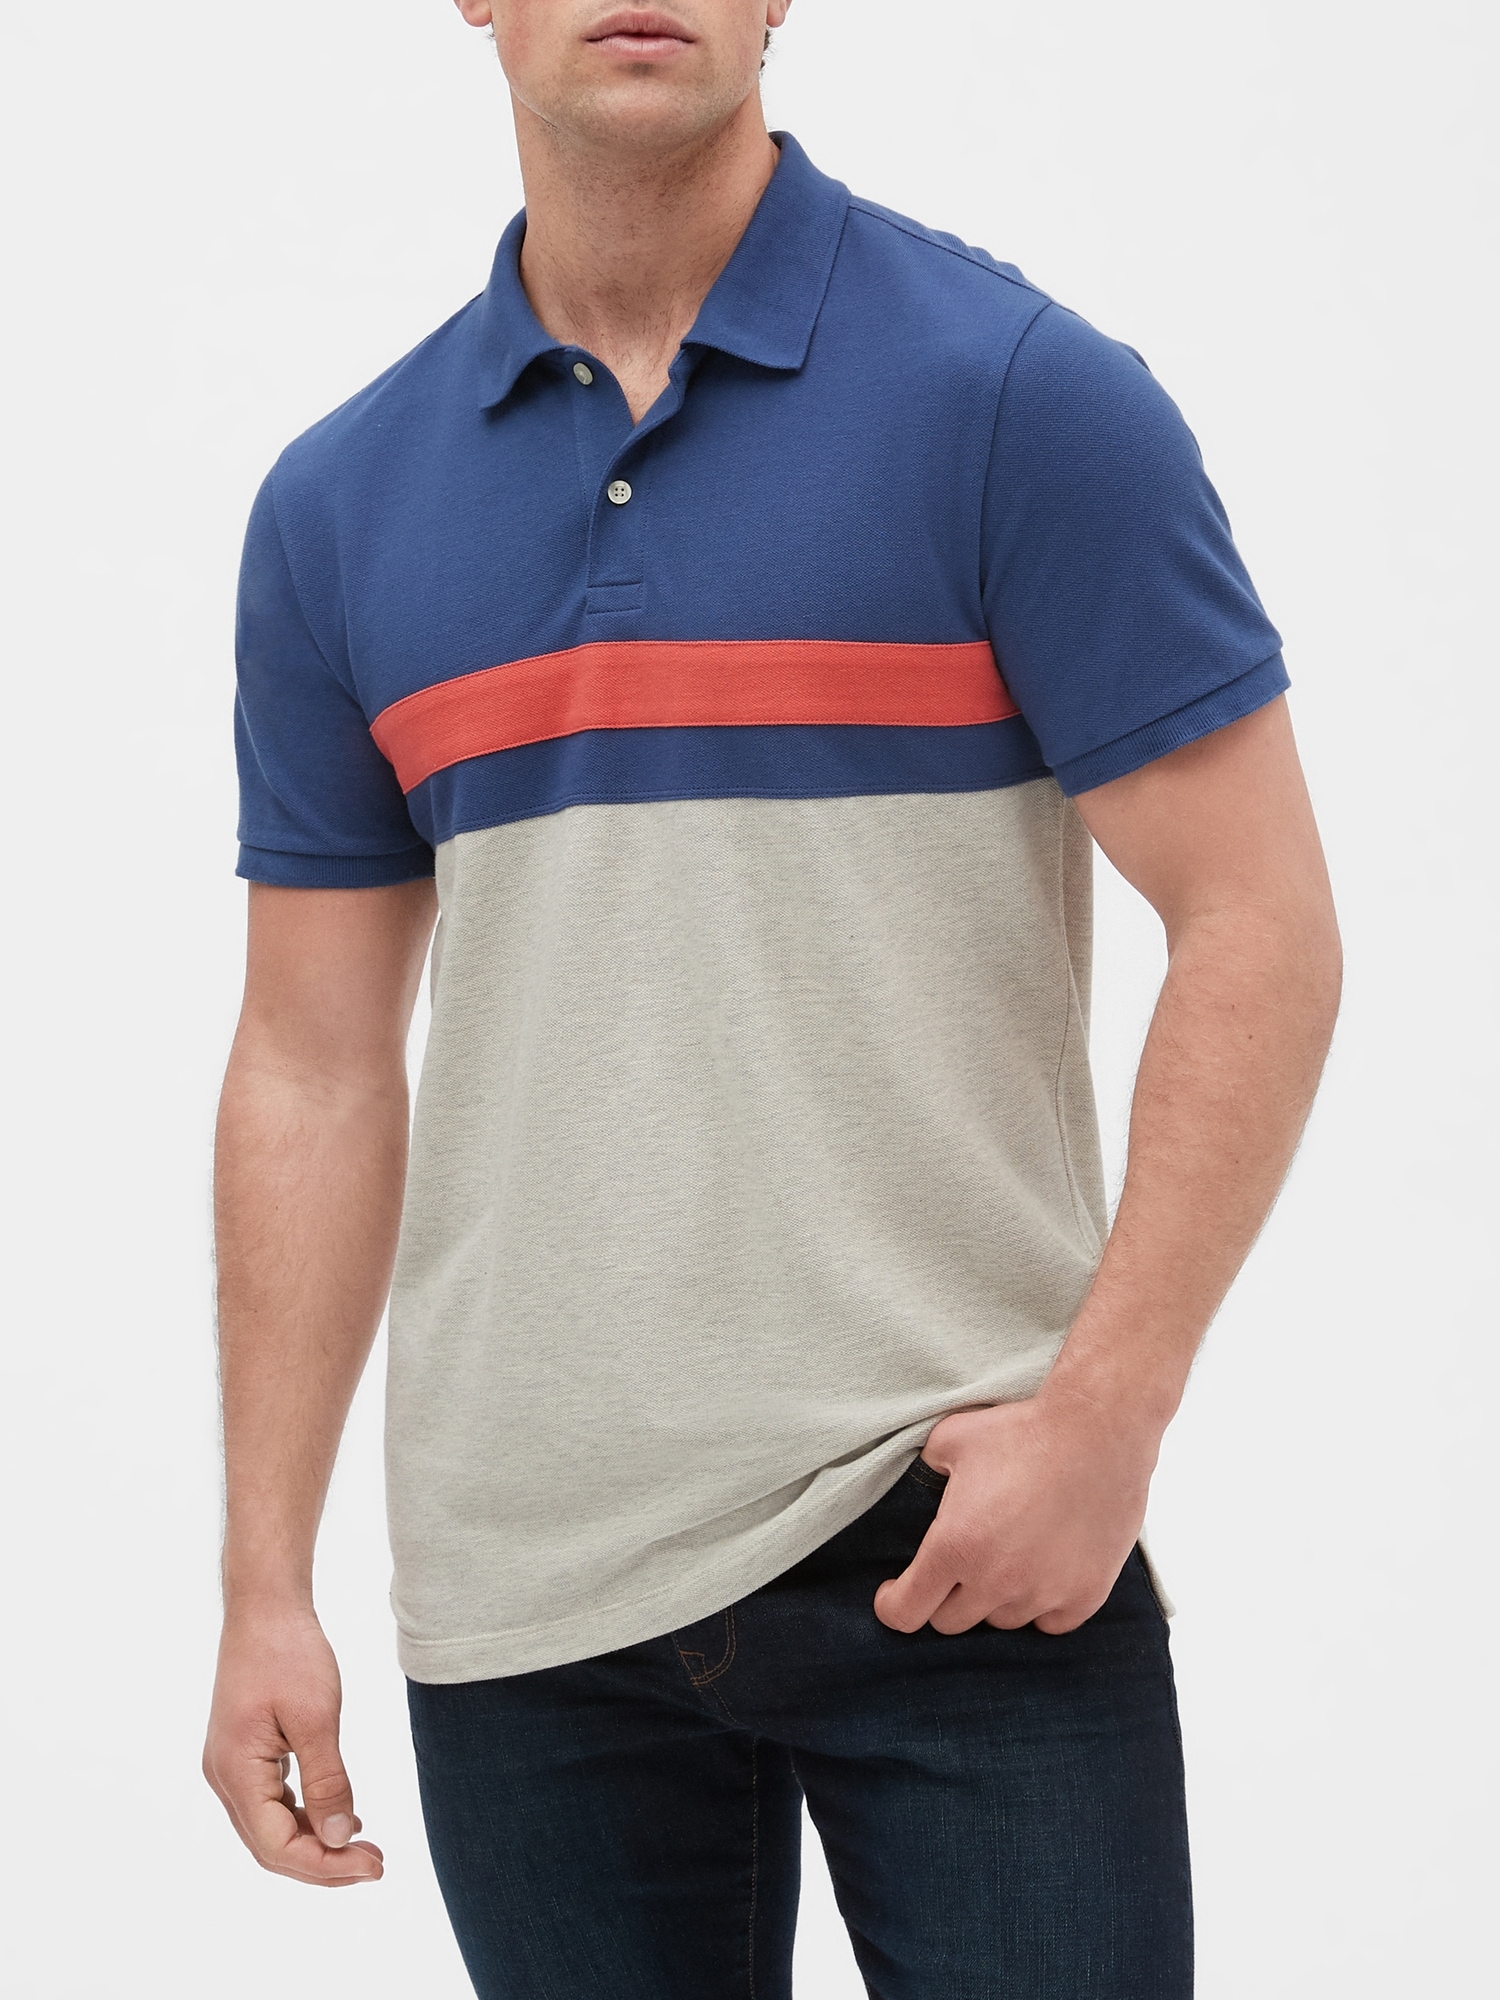 The Knit Colorblock Polo